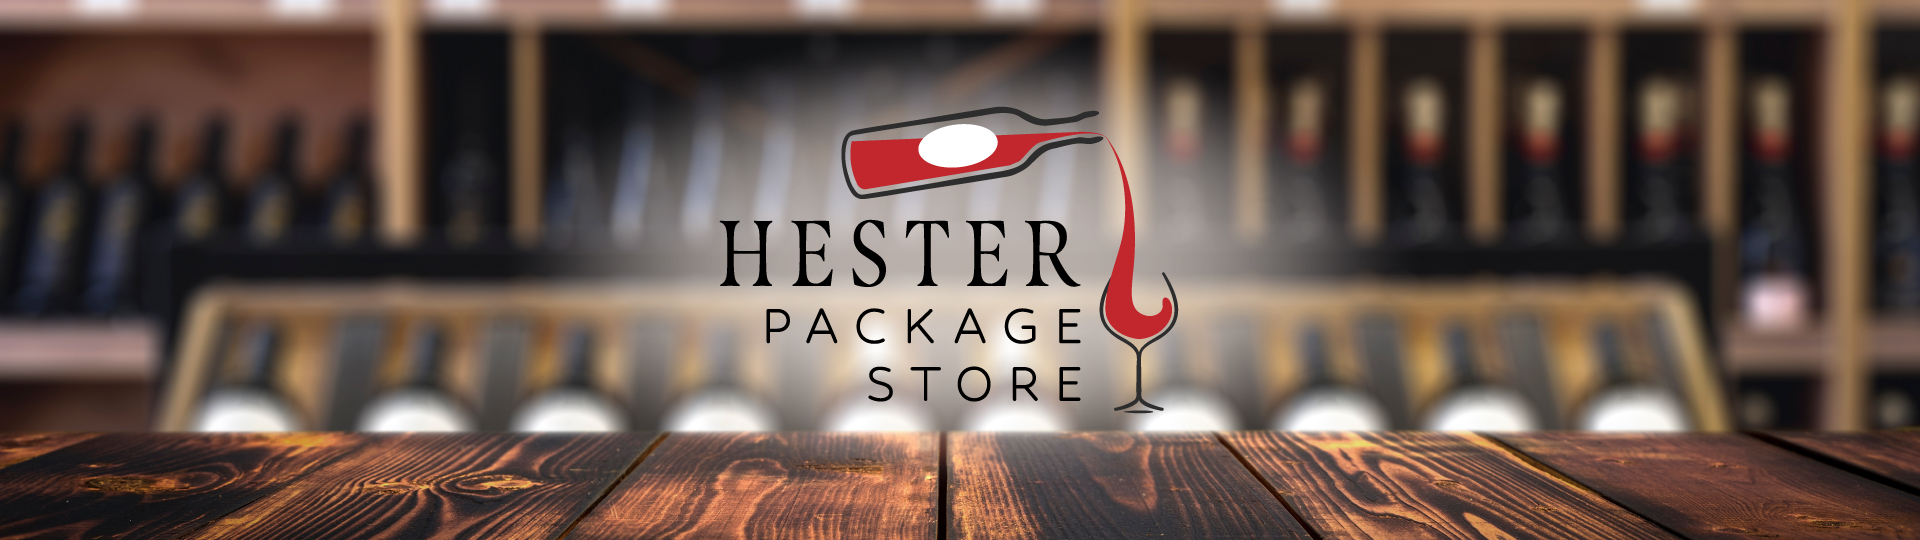 Hester Package Store